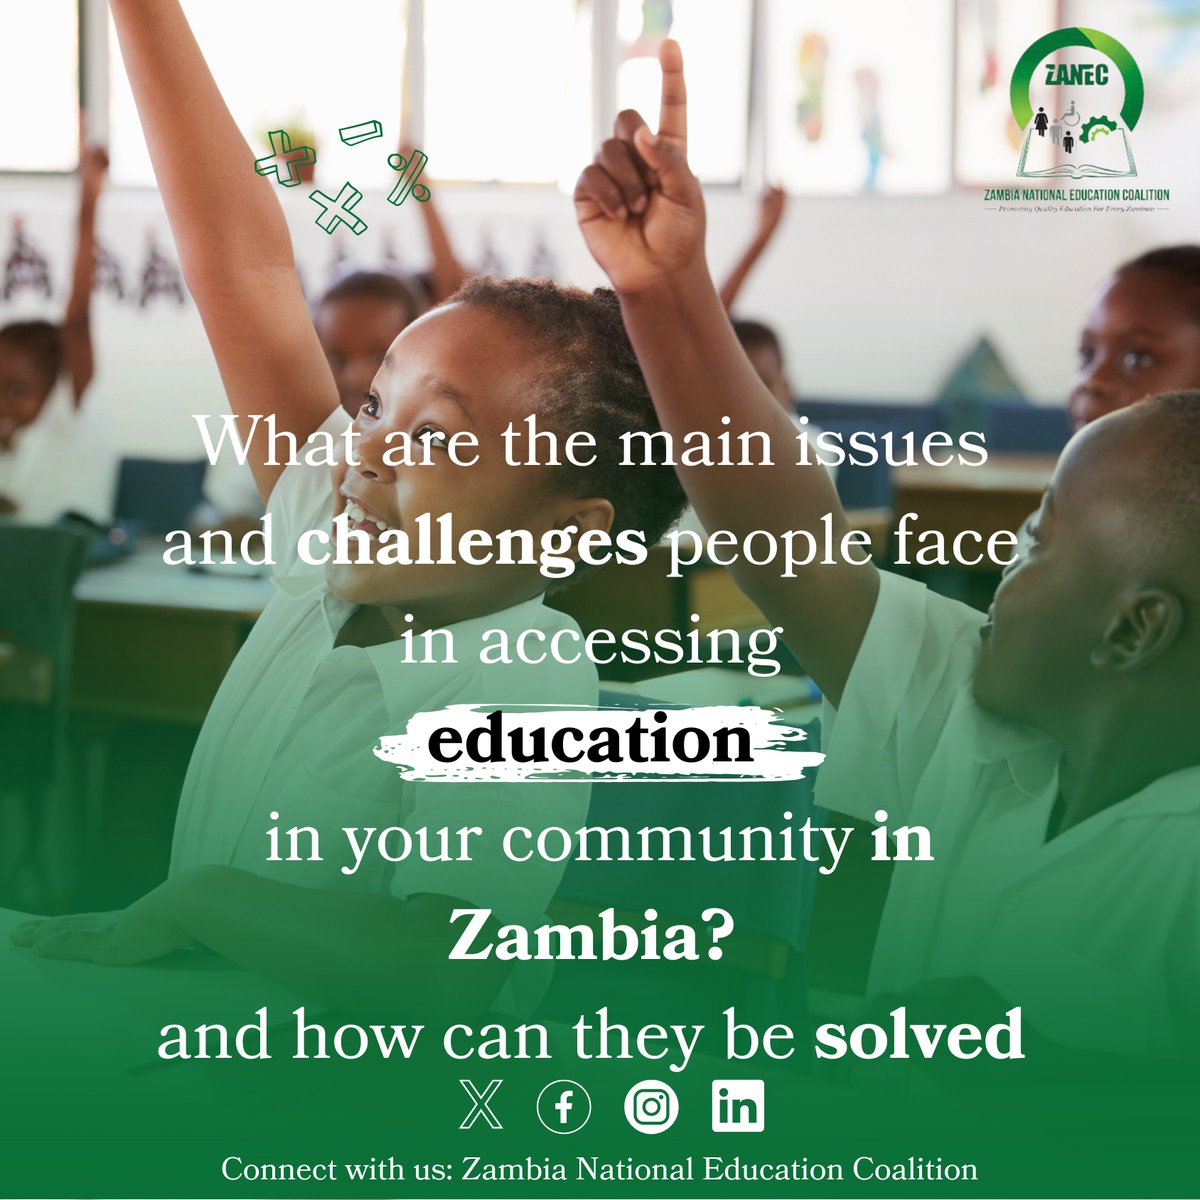 Let's talk! What are the main issues and challenges people face in accessing education in your community in Zambia and how do you think these challenges can they be solved? @GPforEducation